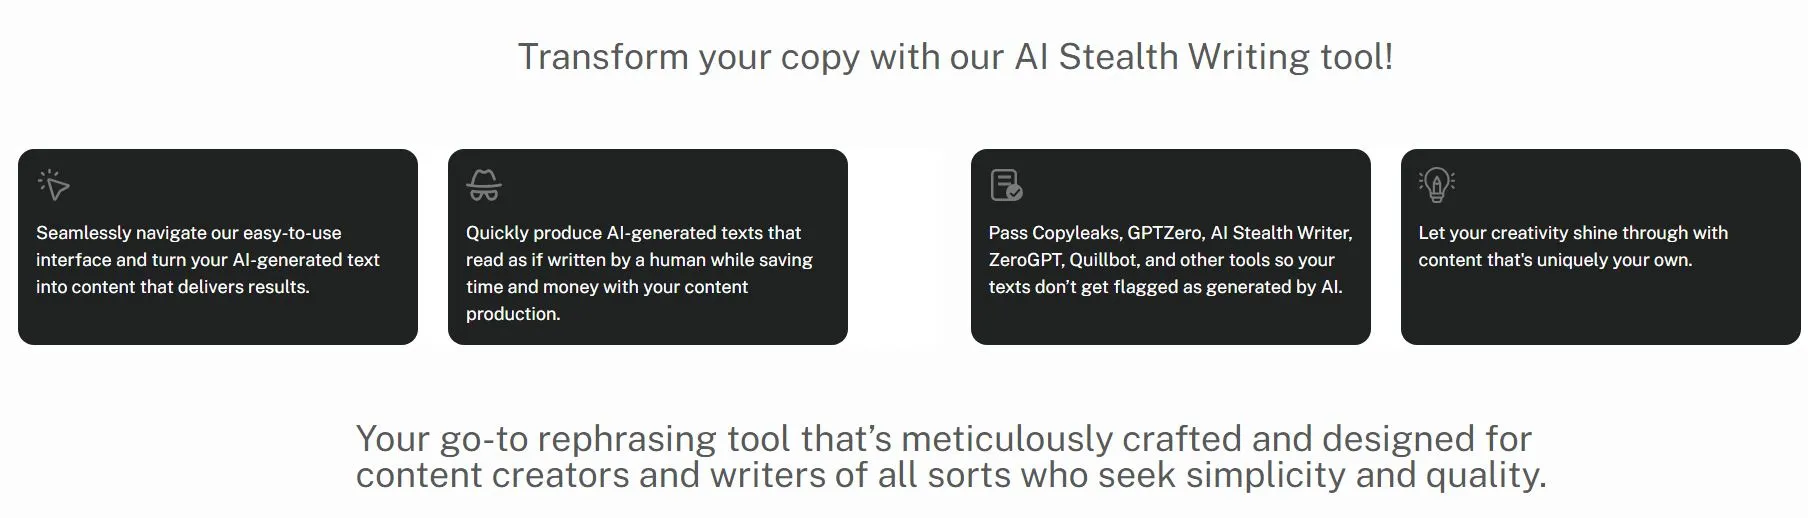 Transform your content with our AI Stealth Writing tool!